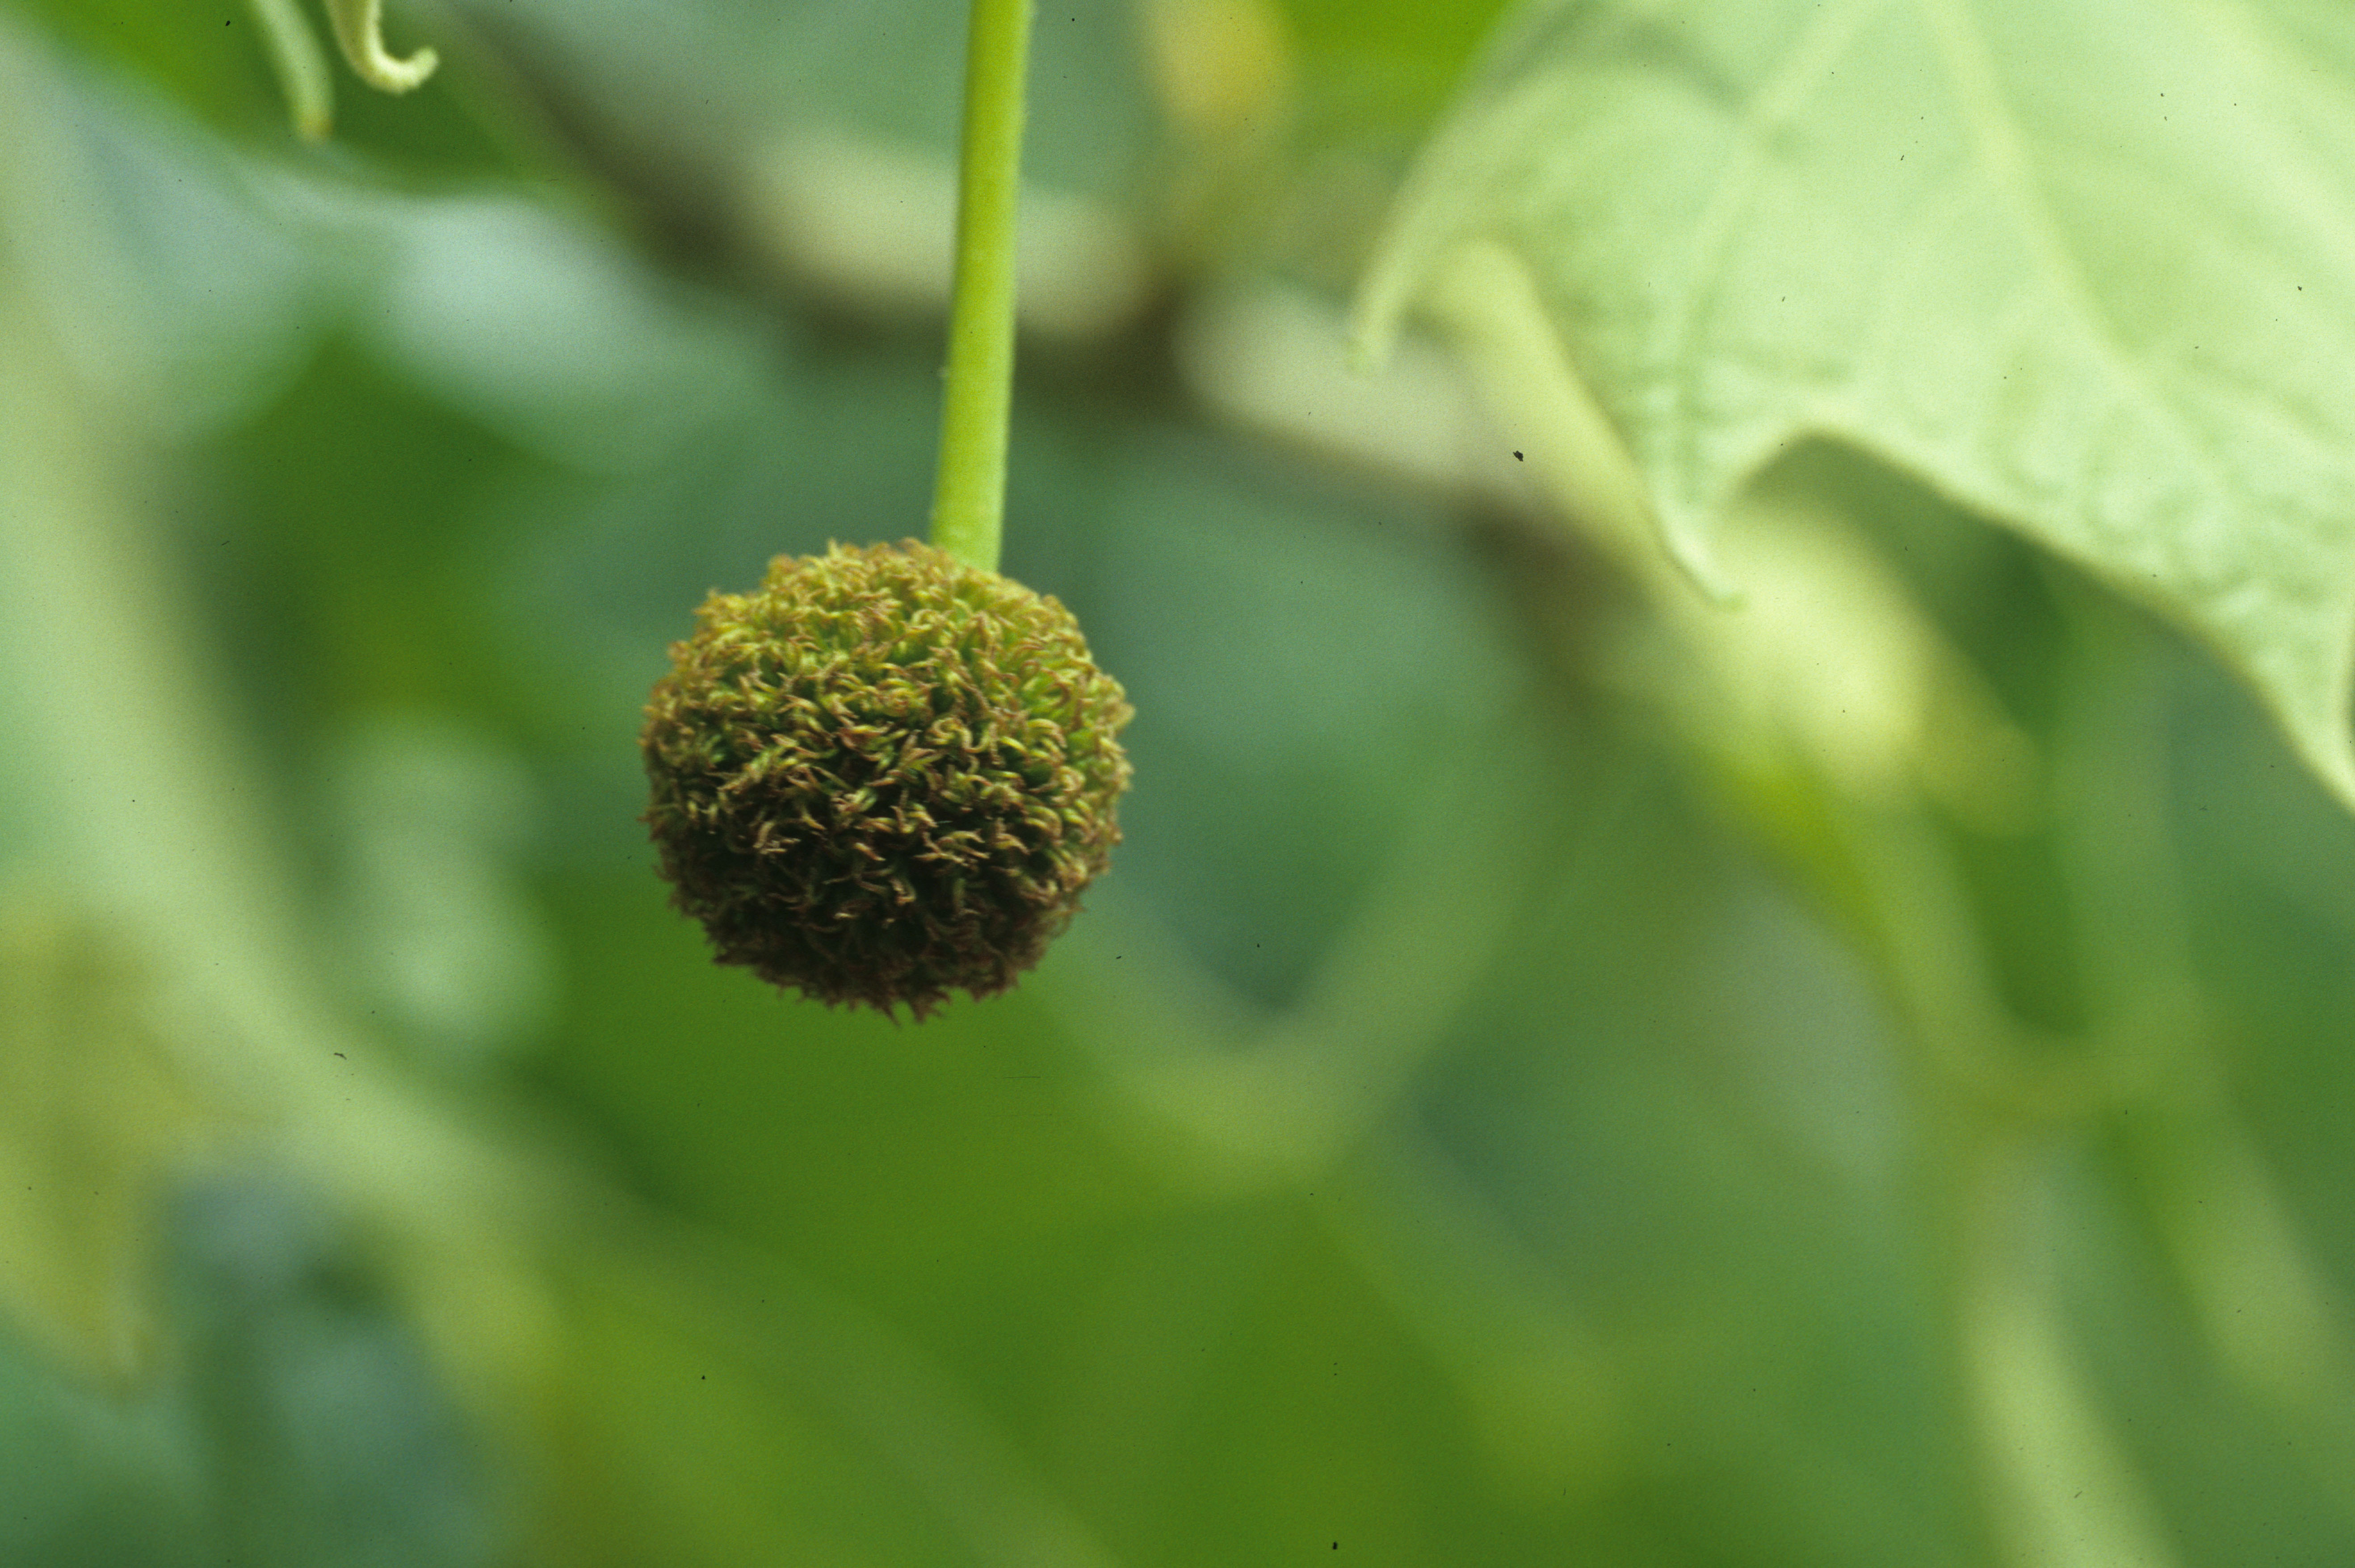 Sycamore seed ball